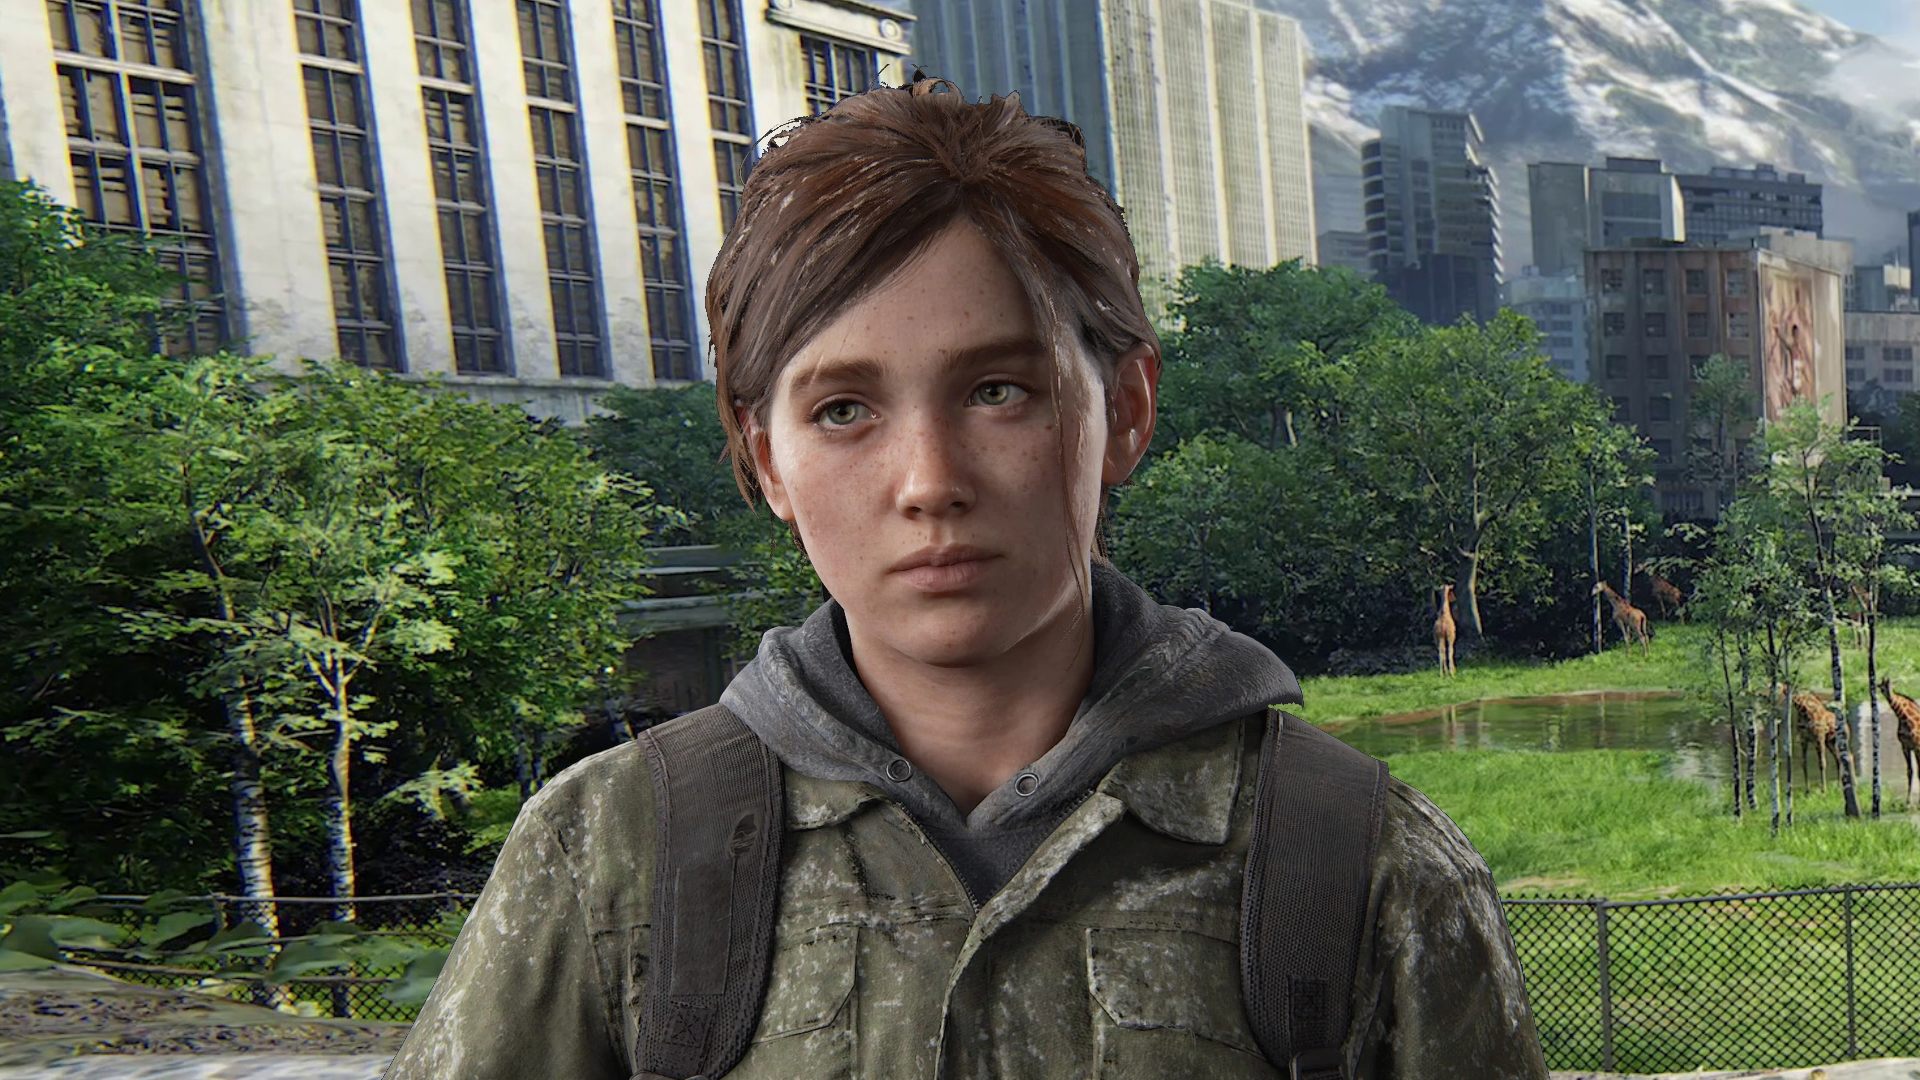 The Last of Us Fans Patch Game Crashing-Glitch Years After Release